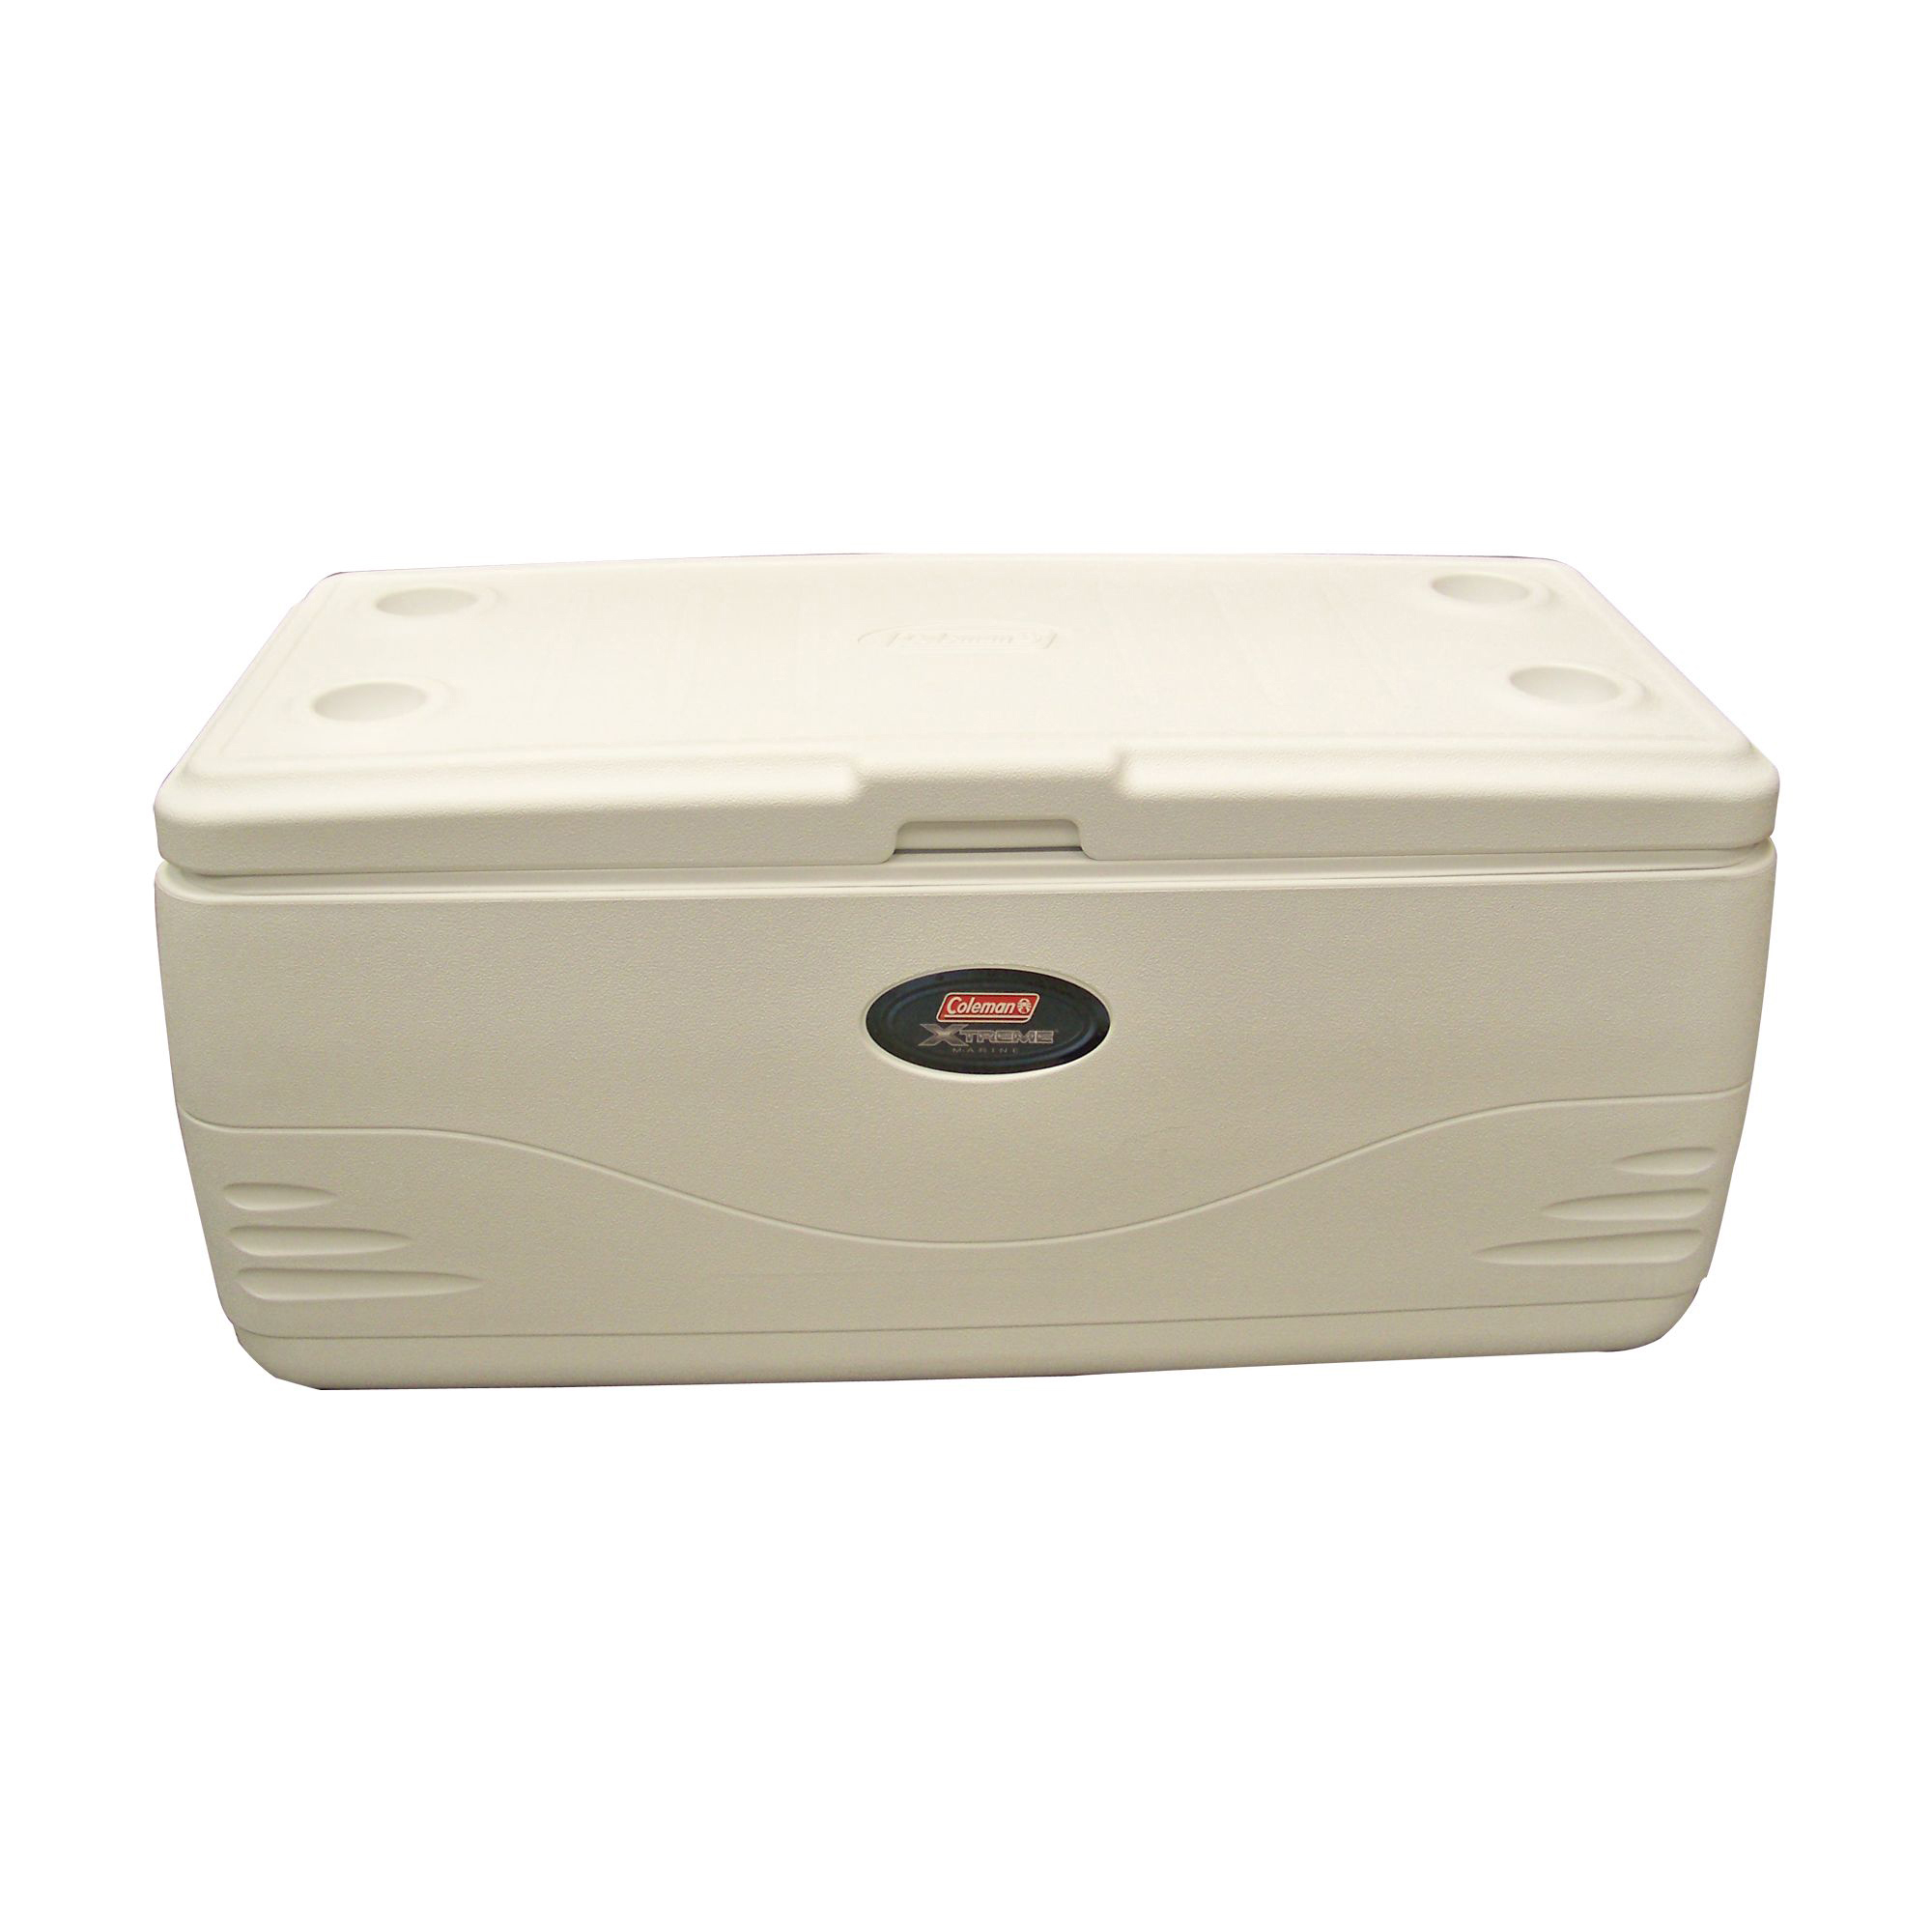 Coleman 150 qt. Marine Hard Sided Ice Chest Cooler, White - image 1 of 2